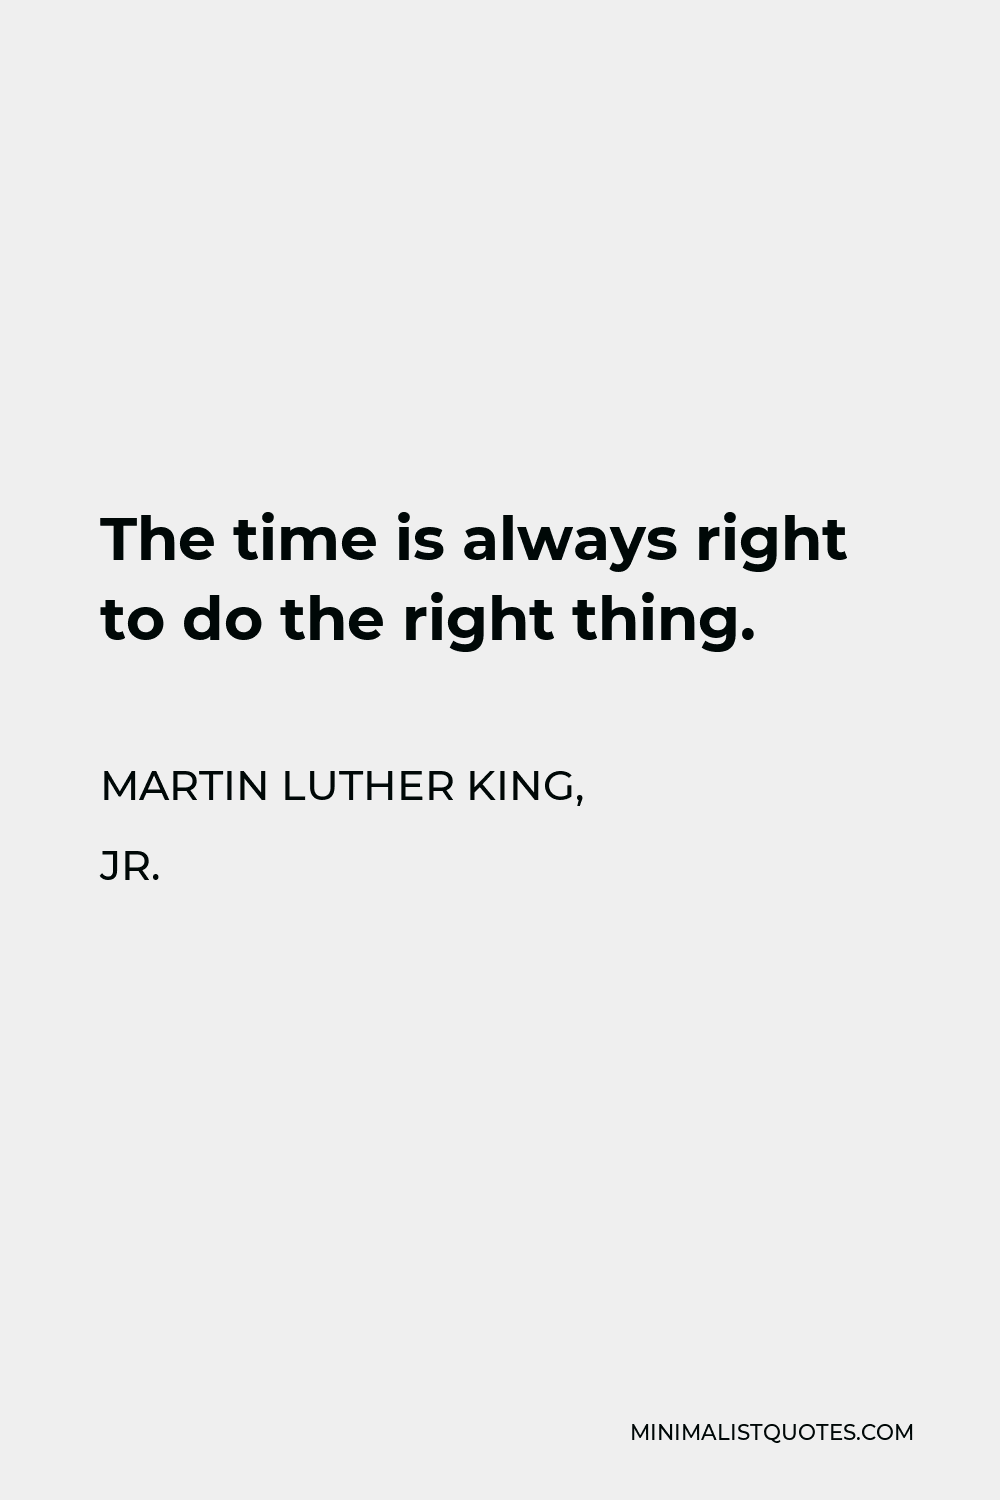 Martin Luther King, Jr. Quote - The time is always right to do the right thing.